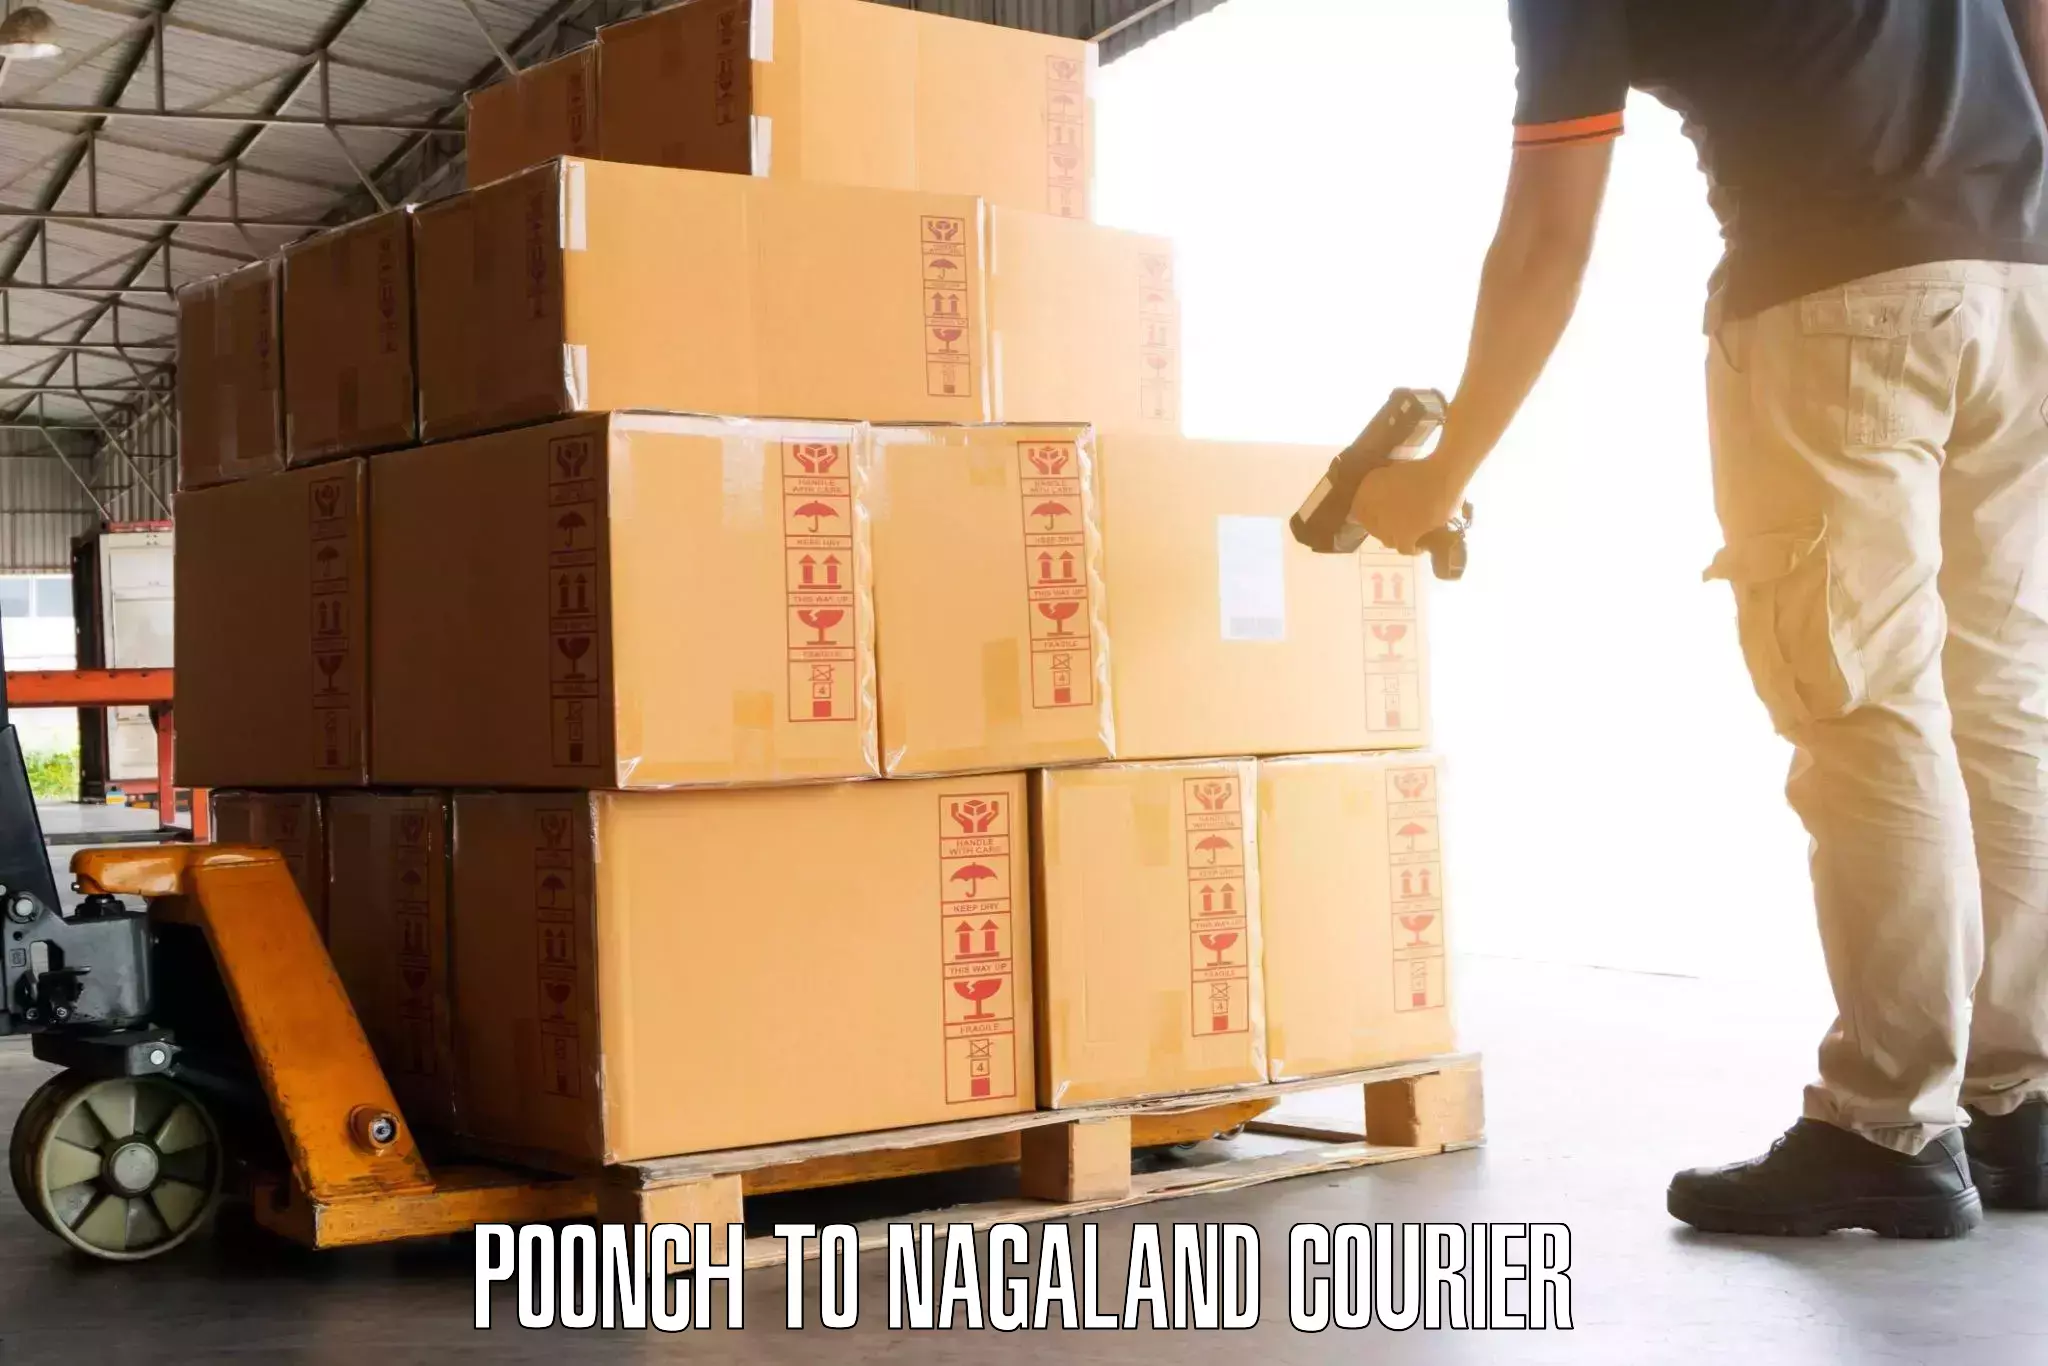 Luggage forwarding service Poonch to Nagaland